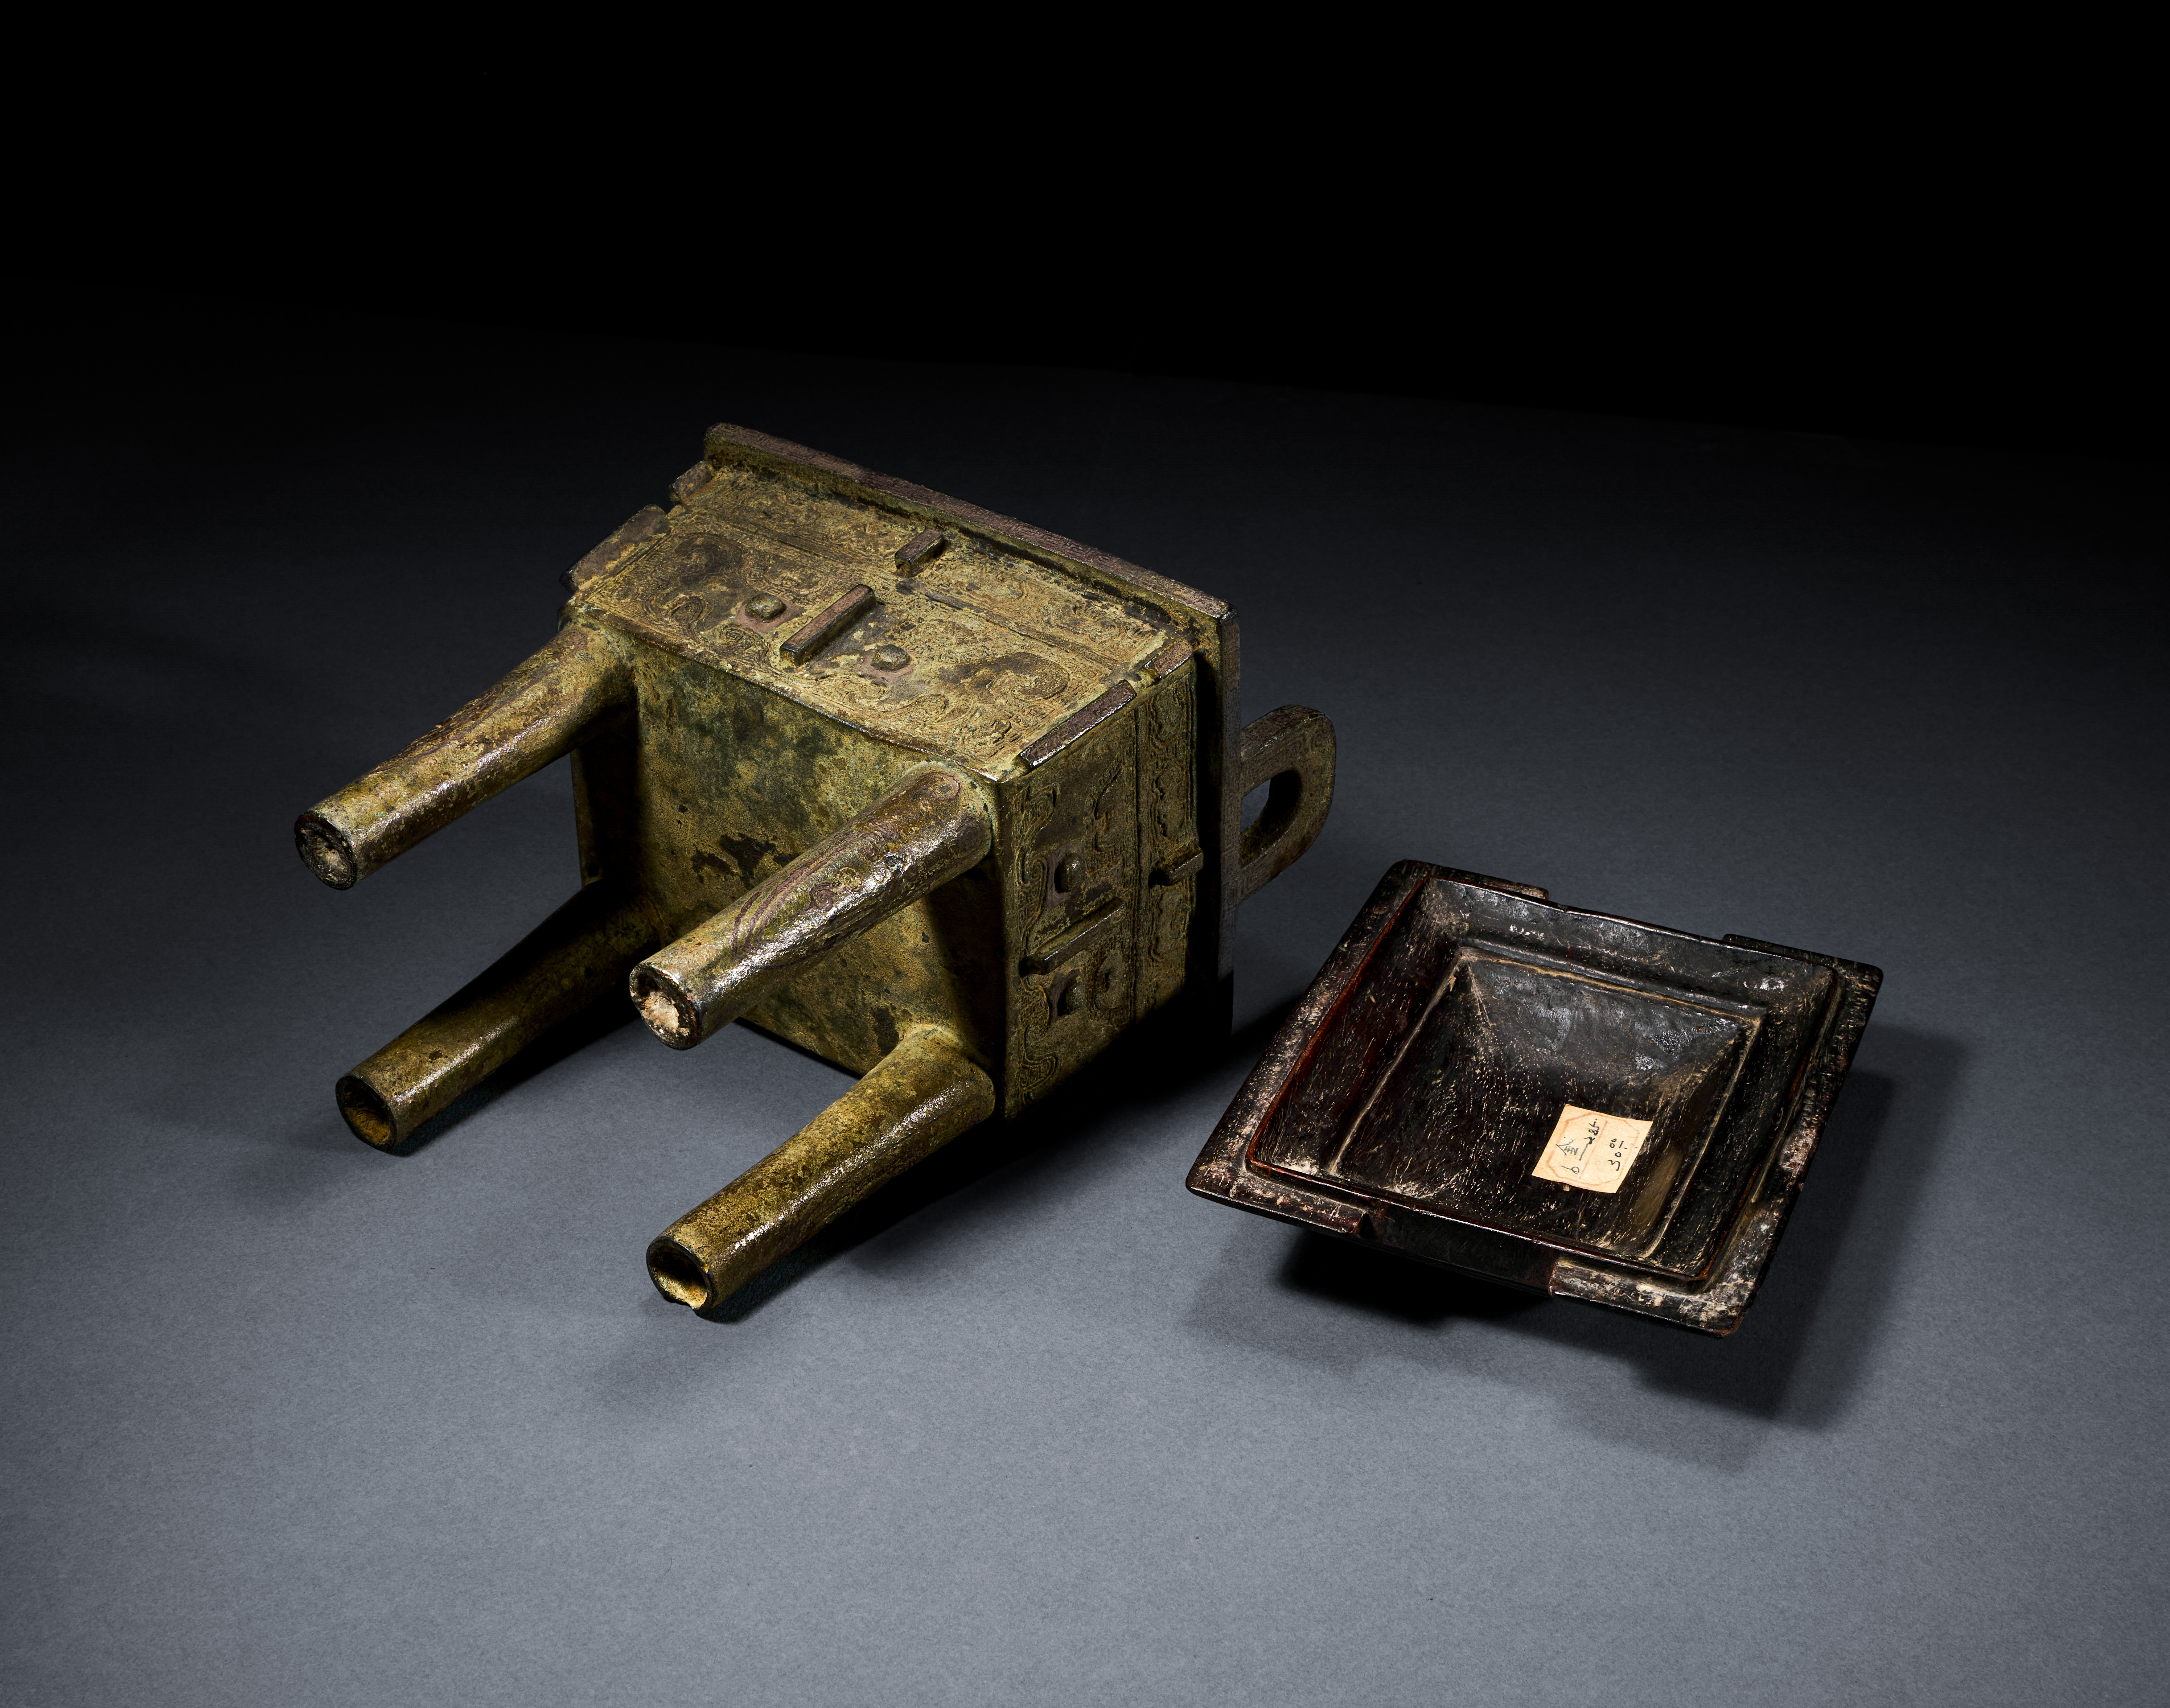 A BRONZE RITUAL RECTANGULAR FOOD VESSEL, FANGDING, LATE SHANG DYNASTY, ANYANG, 12TH-11TH CENTURY BC - Bild 4 aus 4